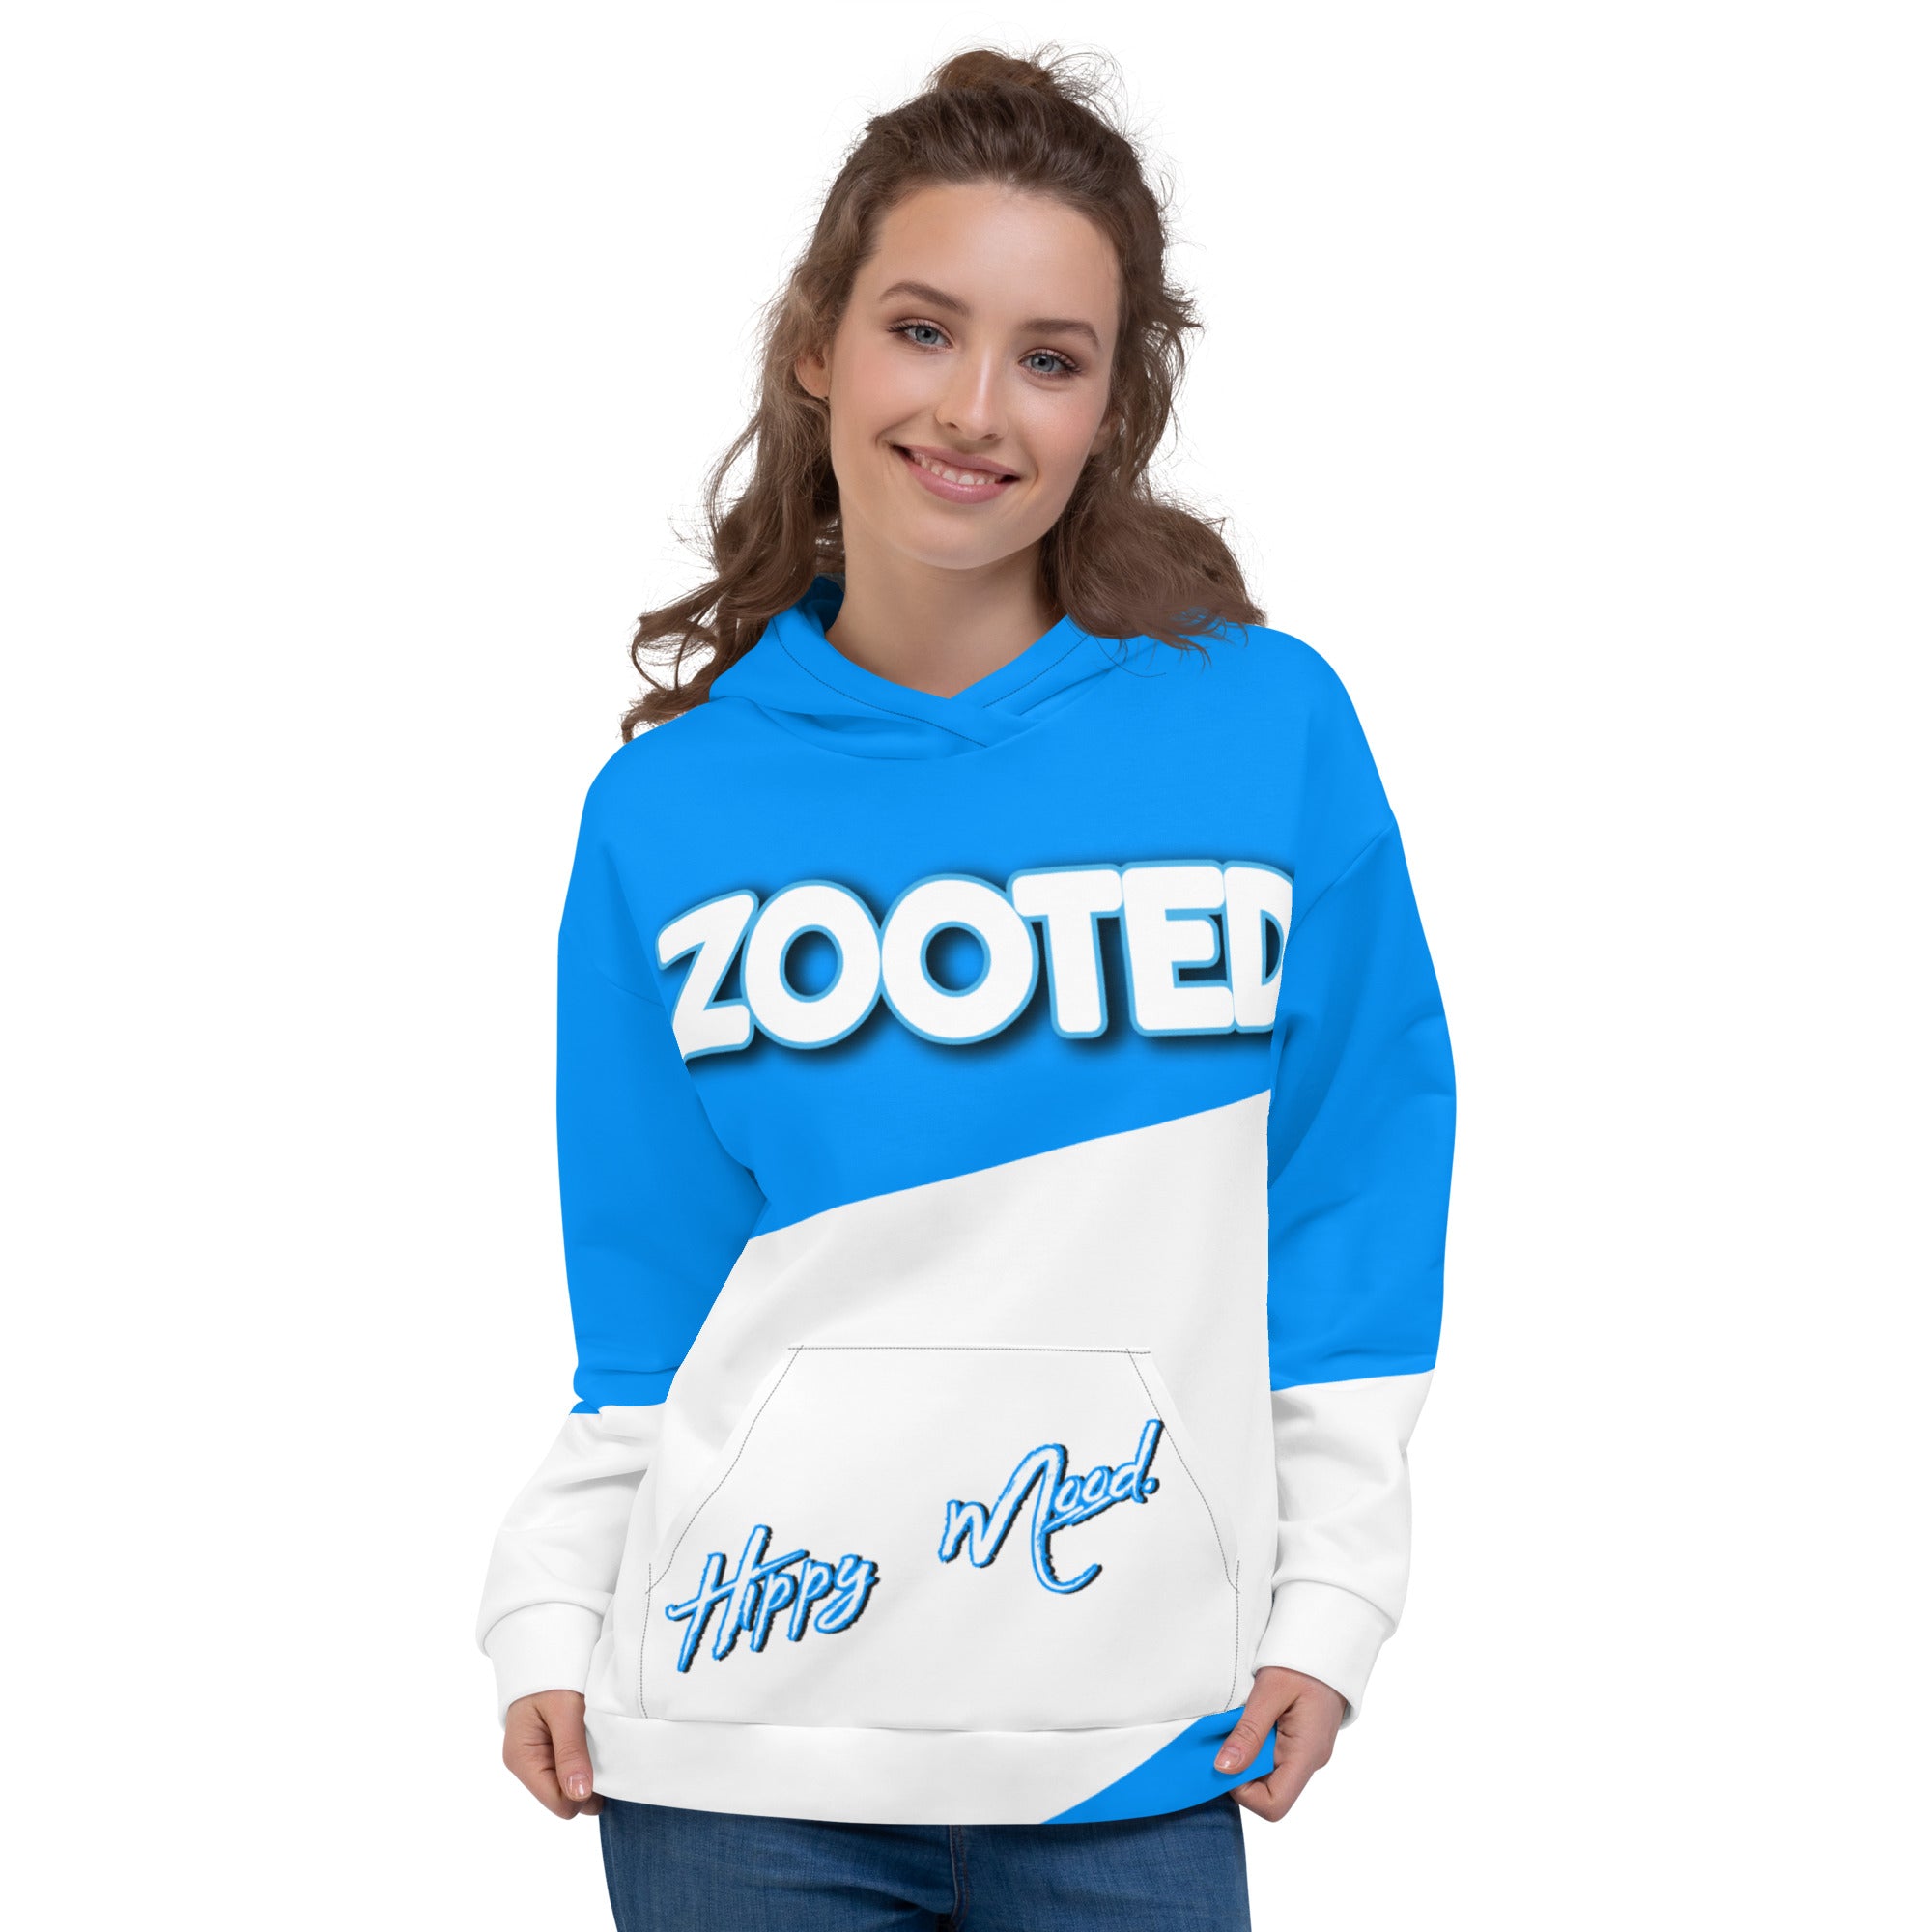 Zooted Unisex Hoodie